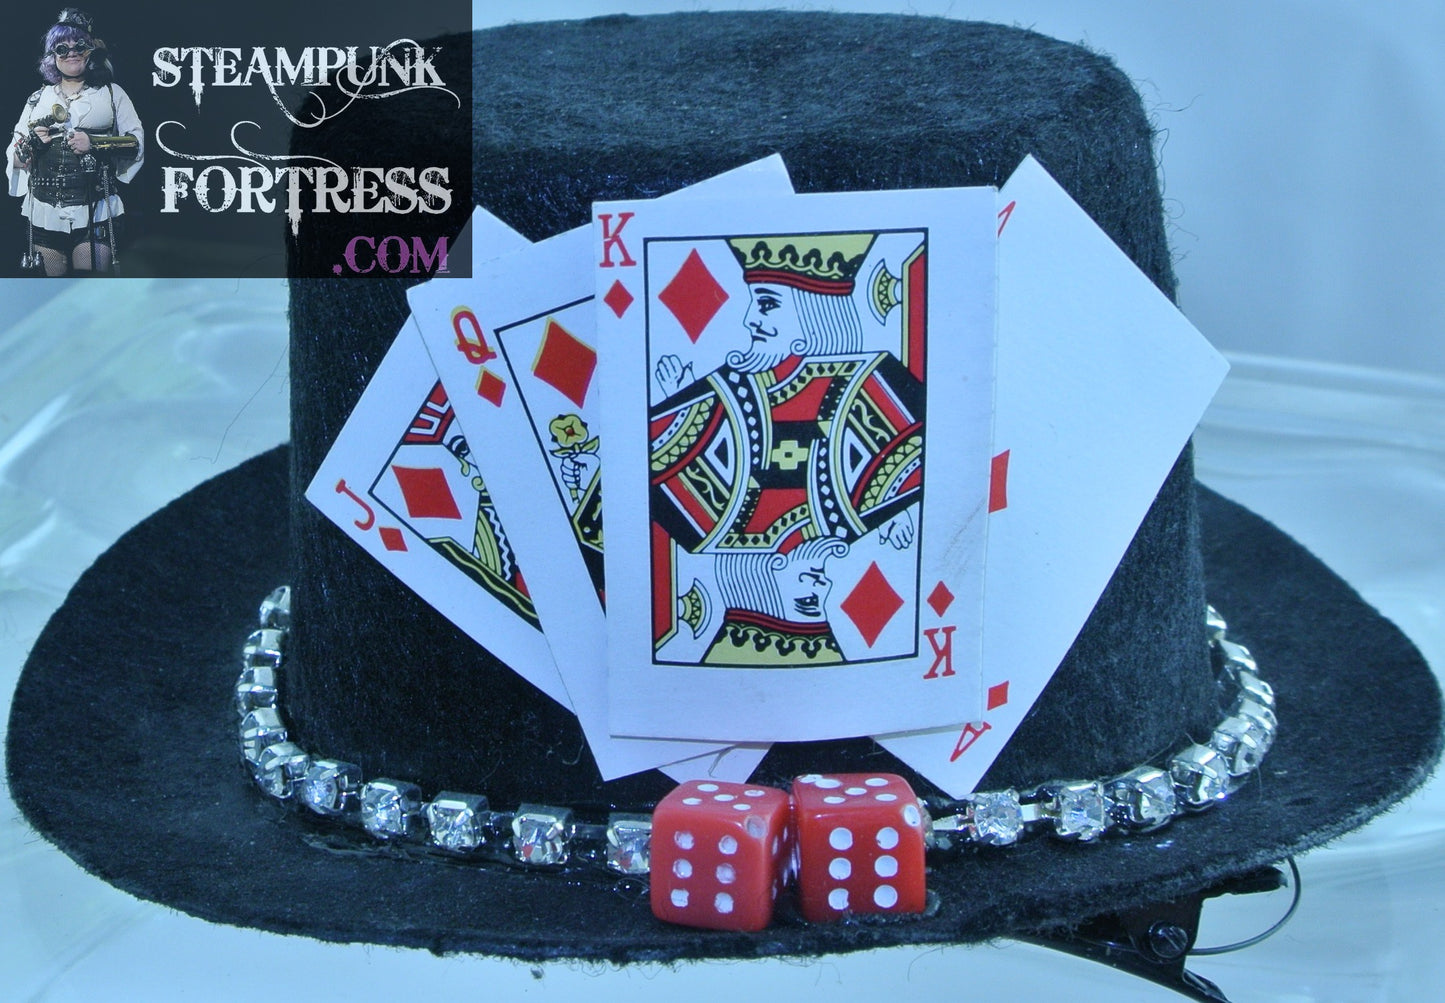 BLACK PLAYING CARDS 4 KING QUEEN ACE JACK RED DIAMONDS 2 RED DICE RHINESTONES BAND BLACK XS EXTRA SMALL MINI TOP HAT ALICE IN WONDERLAND COSPLAY COSTUME HALLOWEEN POKER STARR WILDE STEAMPUNK FORTRESS